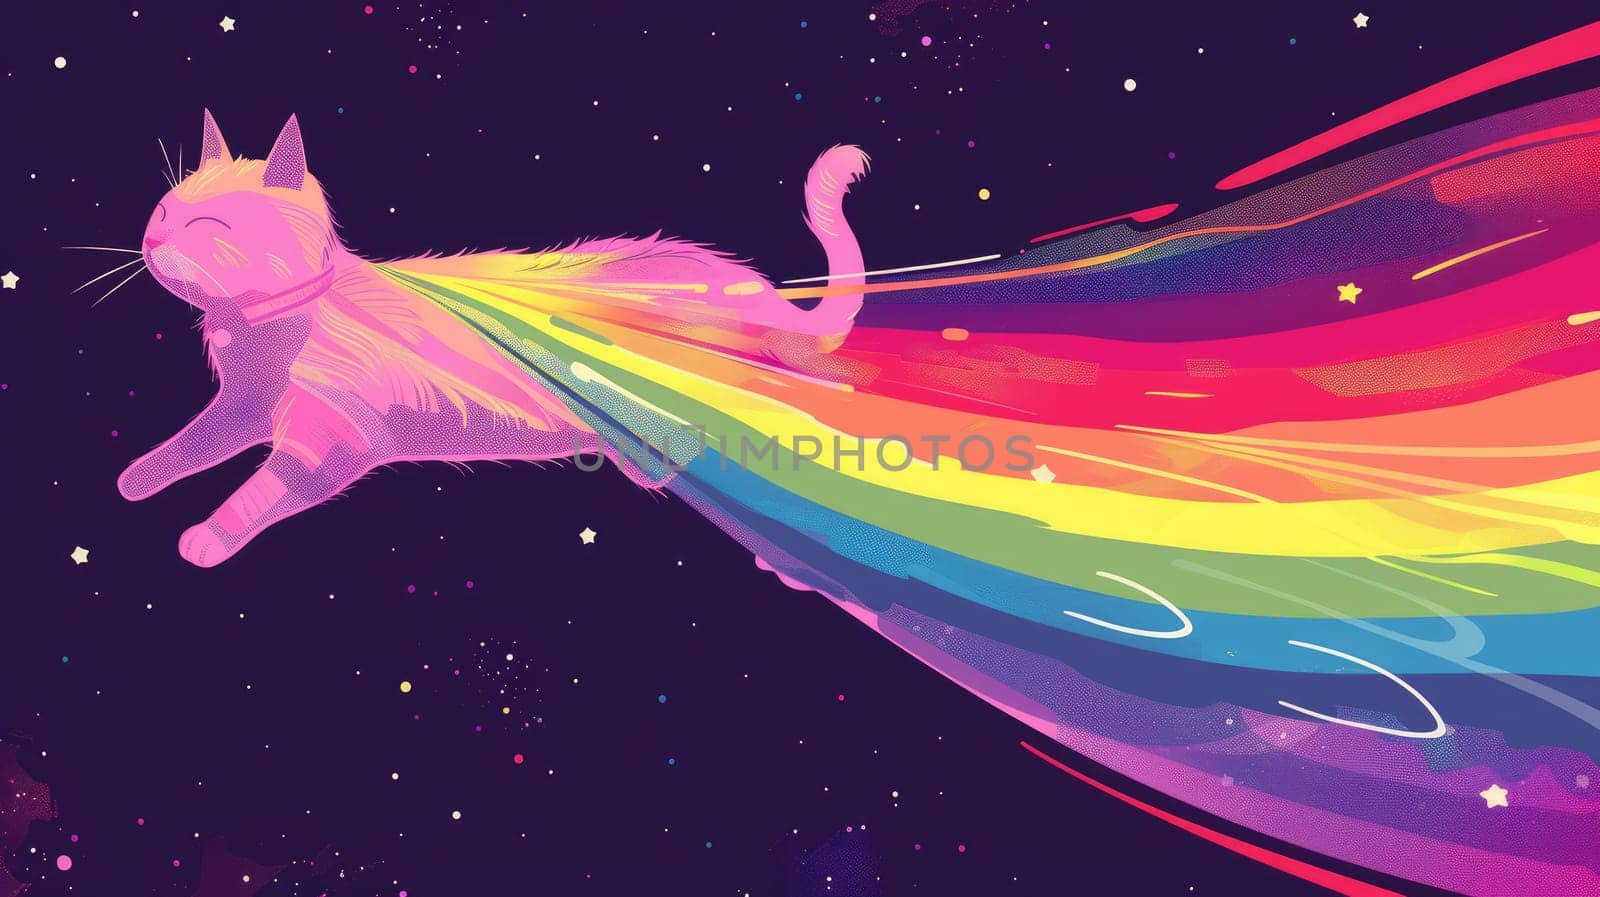 A cat with rainbow, Abstract wallpaper of a cat in space with rainbow, Colorful art of animal.